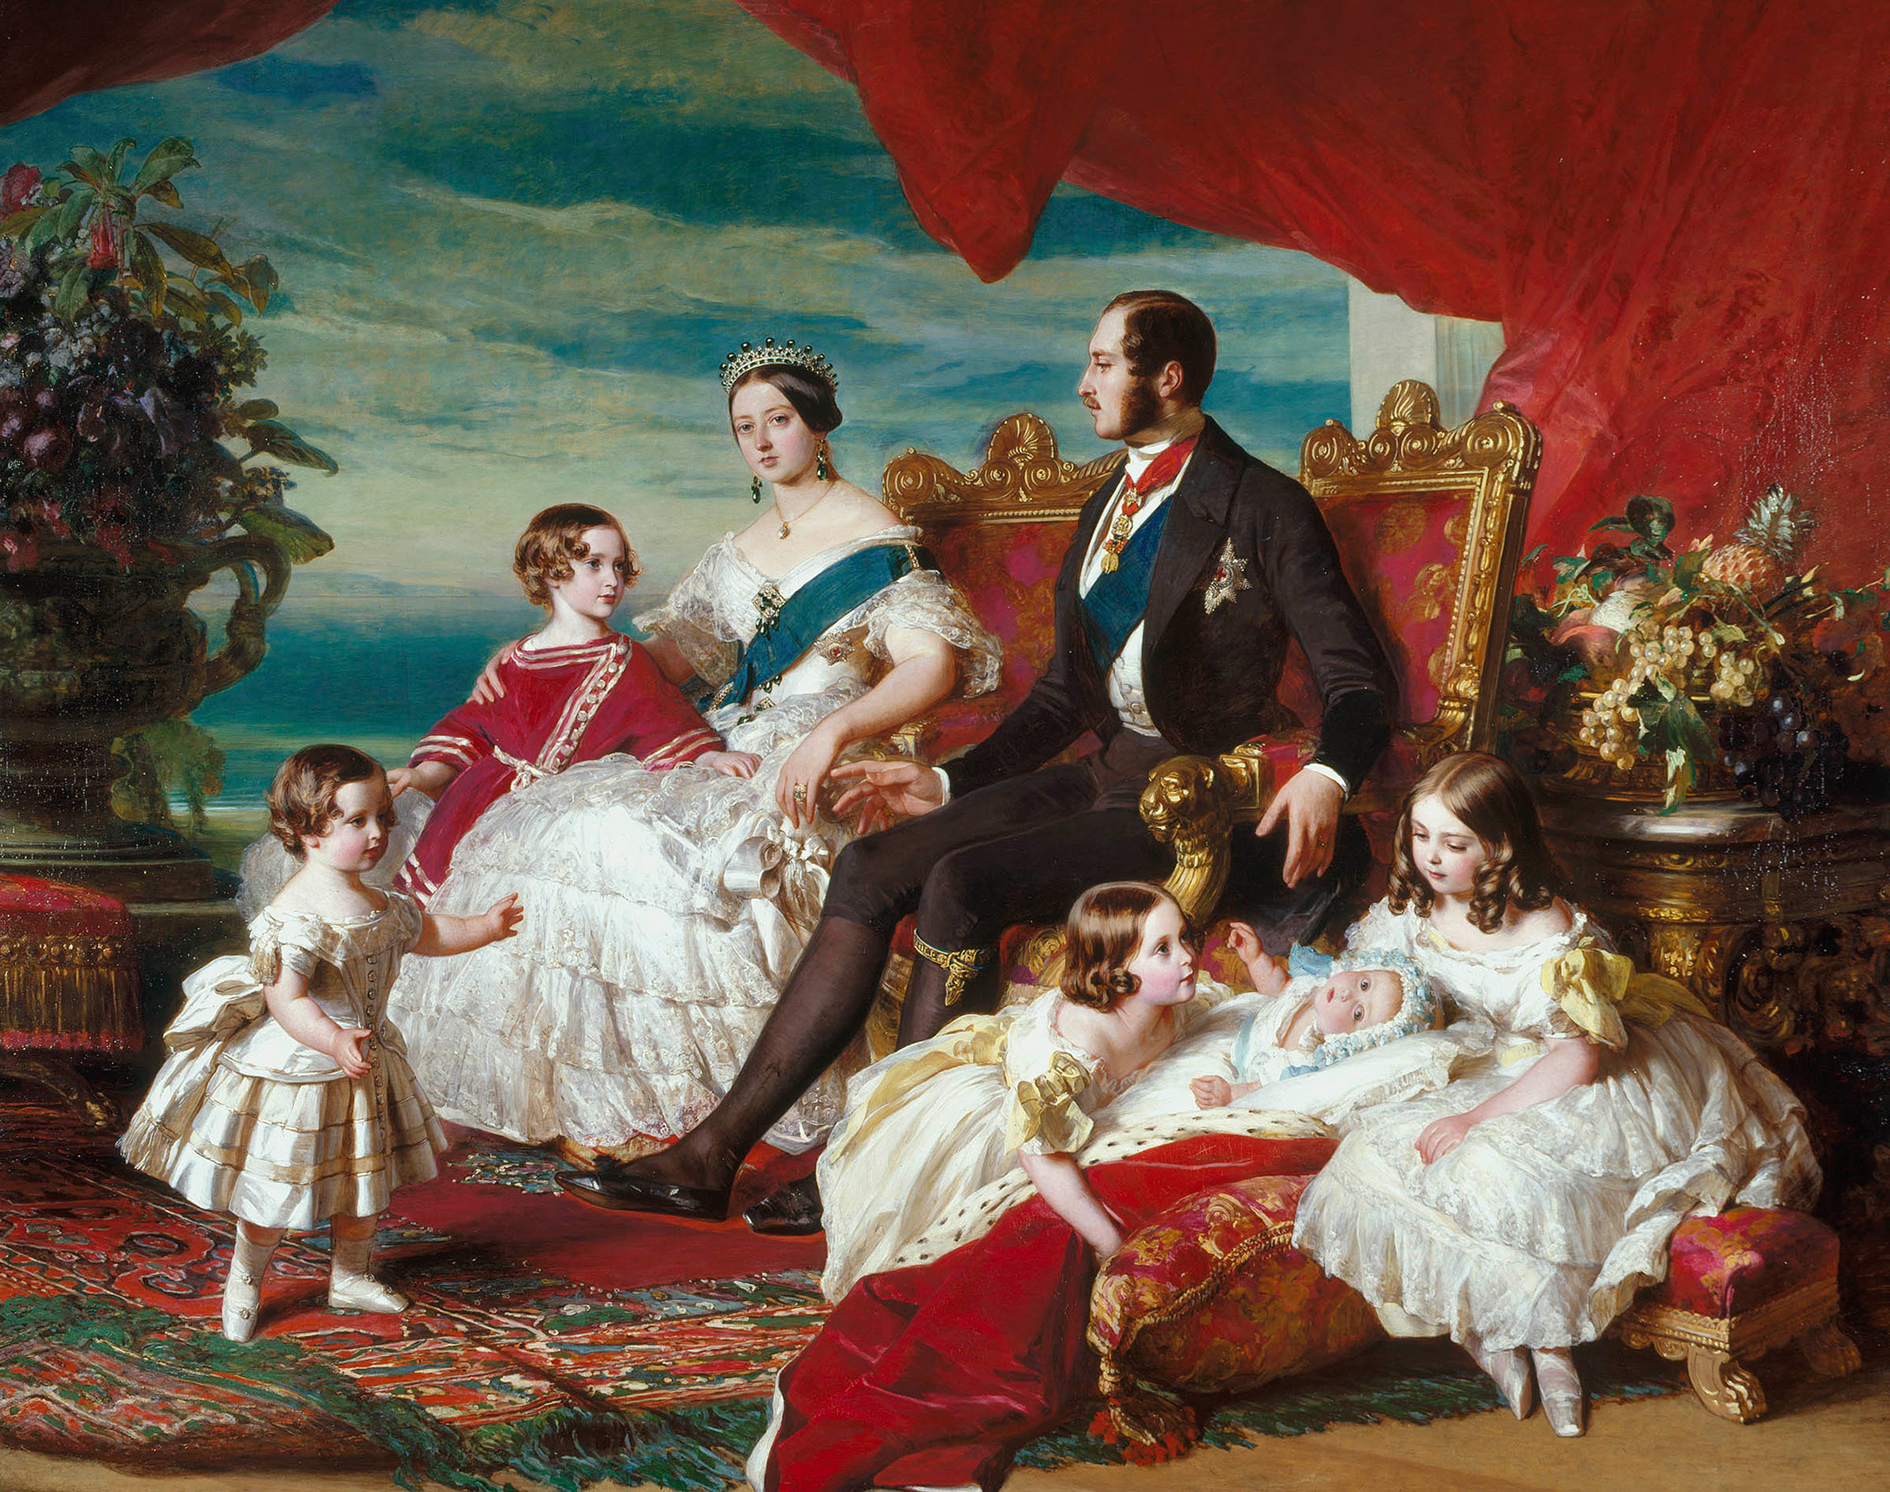 an 1846 portrait by Franz Xaver Winterhalter of Queen Victoria and her family. The girls are wearing white dresses with yellow bows and sashes.